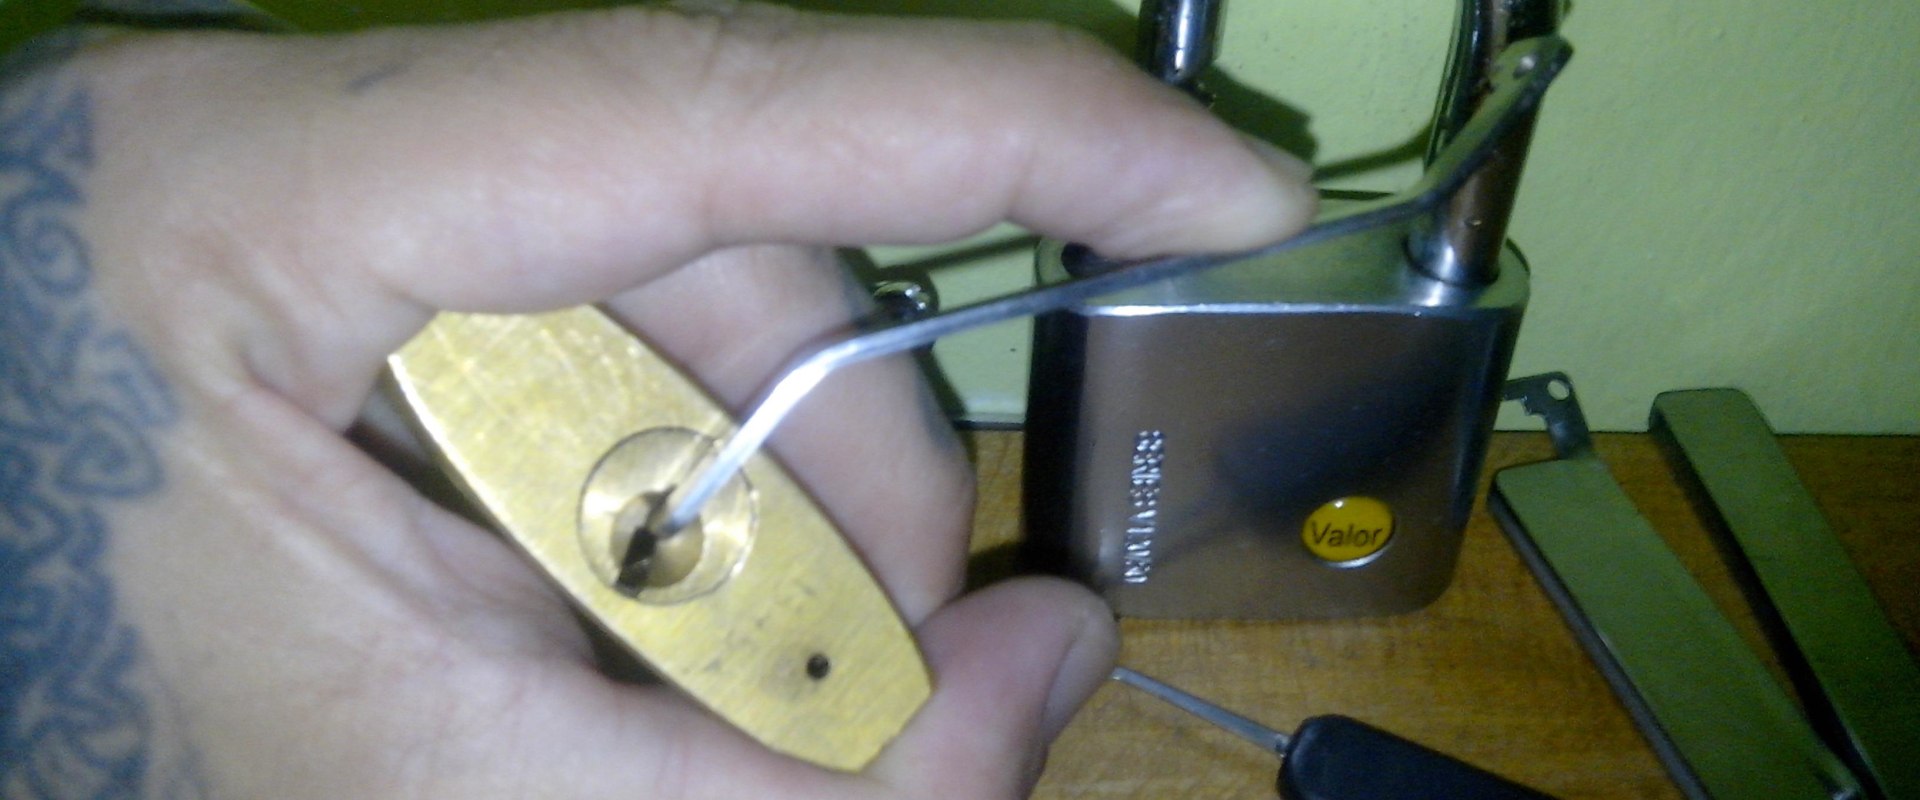 Which Lock is the Hardest to Pick?